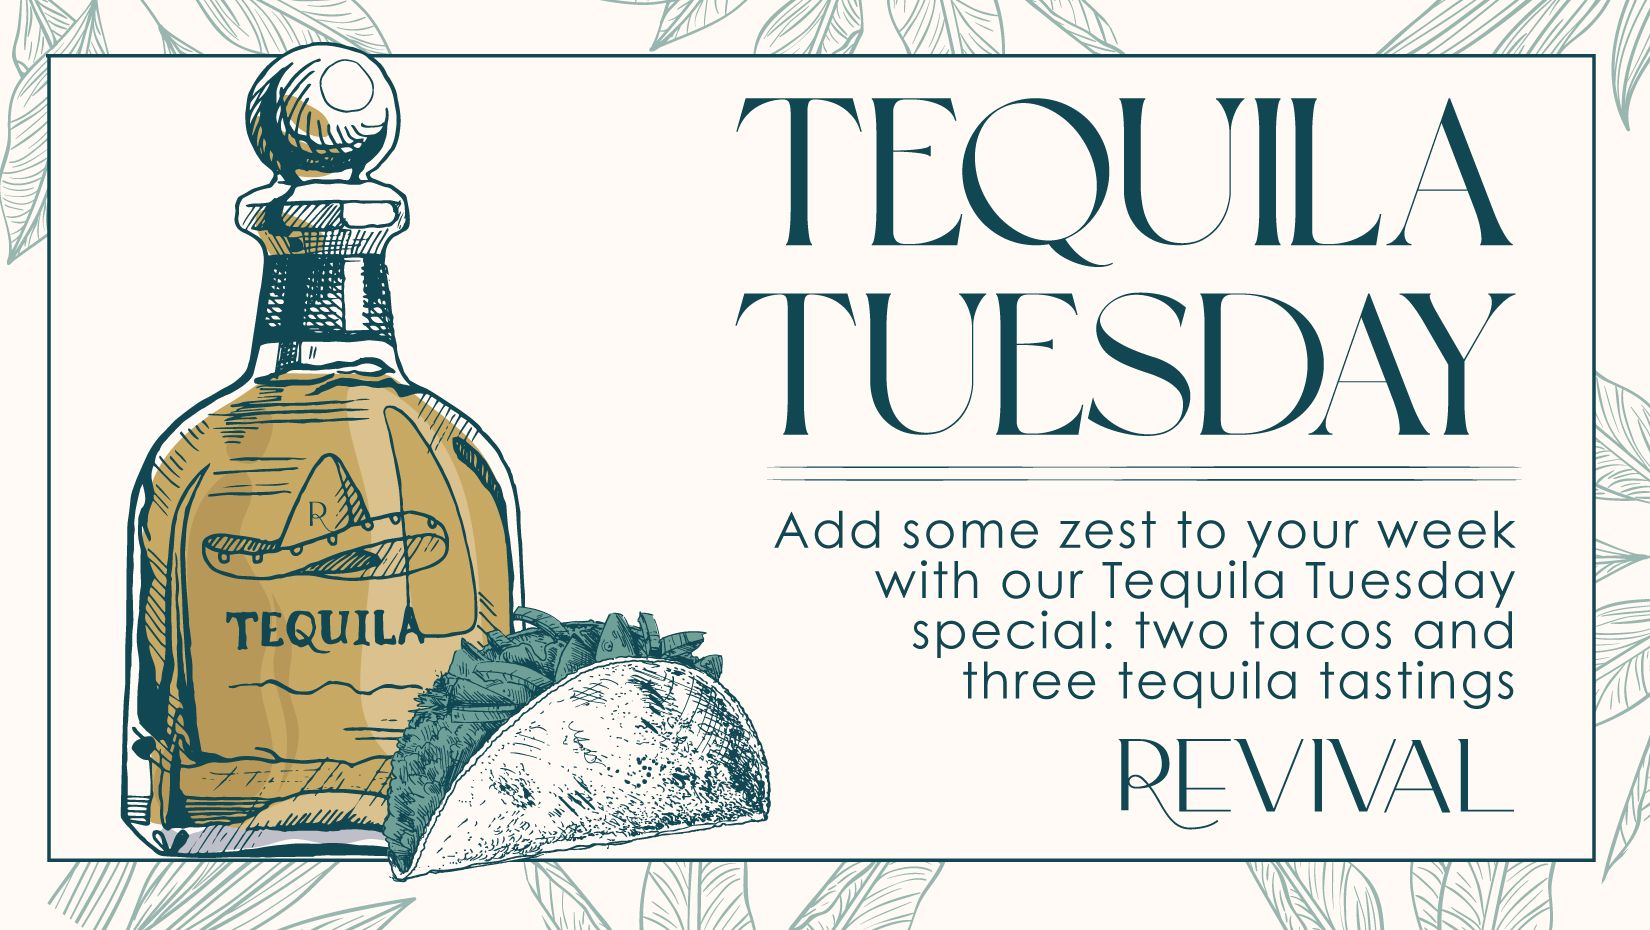 Revival Tequila Tuesdays